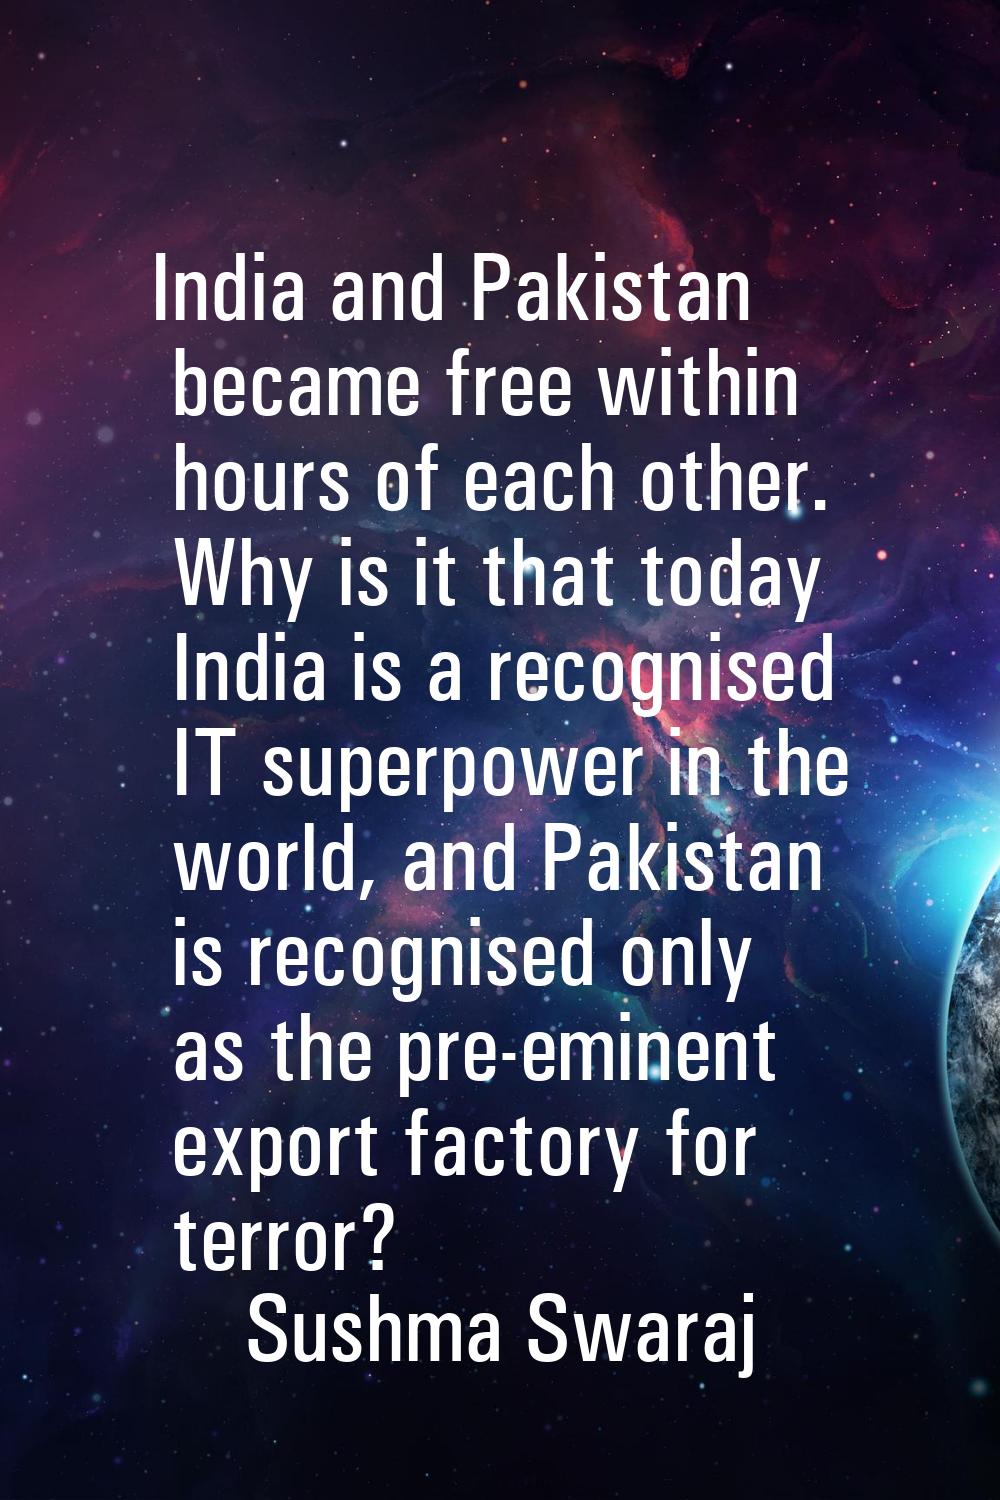 India and Pakistan became free within hours of each other. Why is it that today India is a recognis